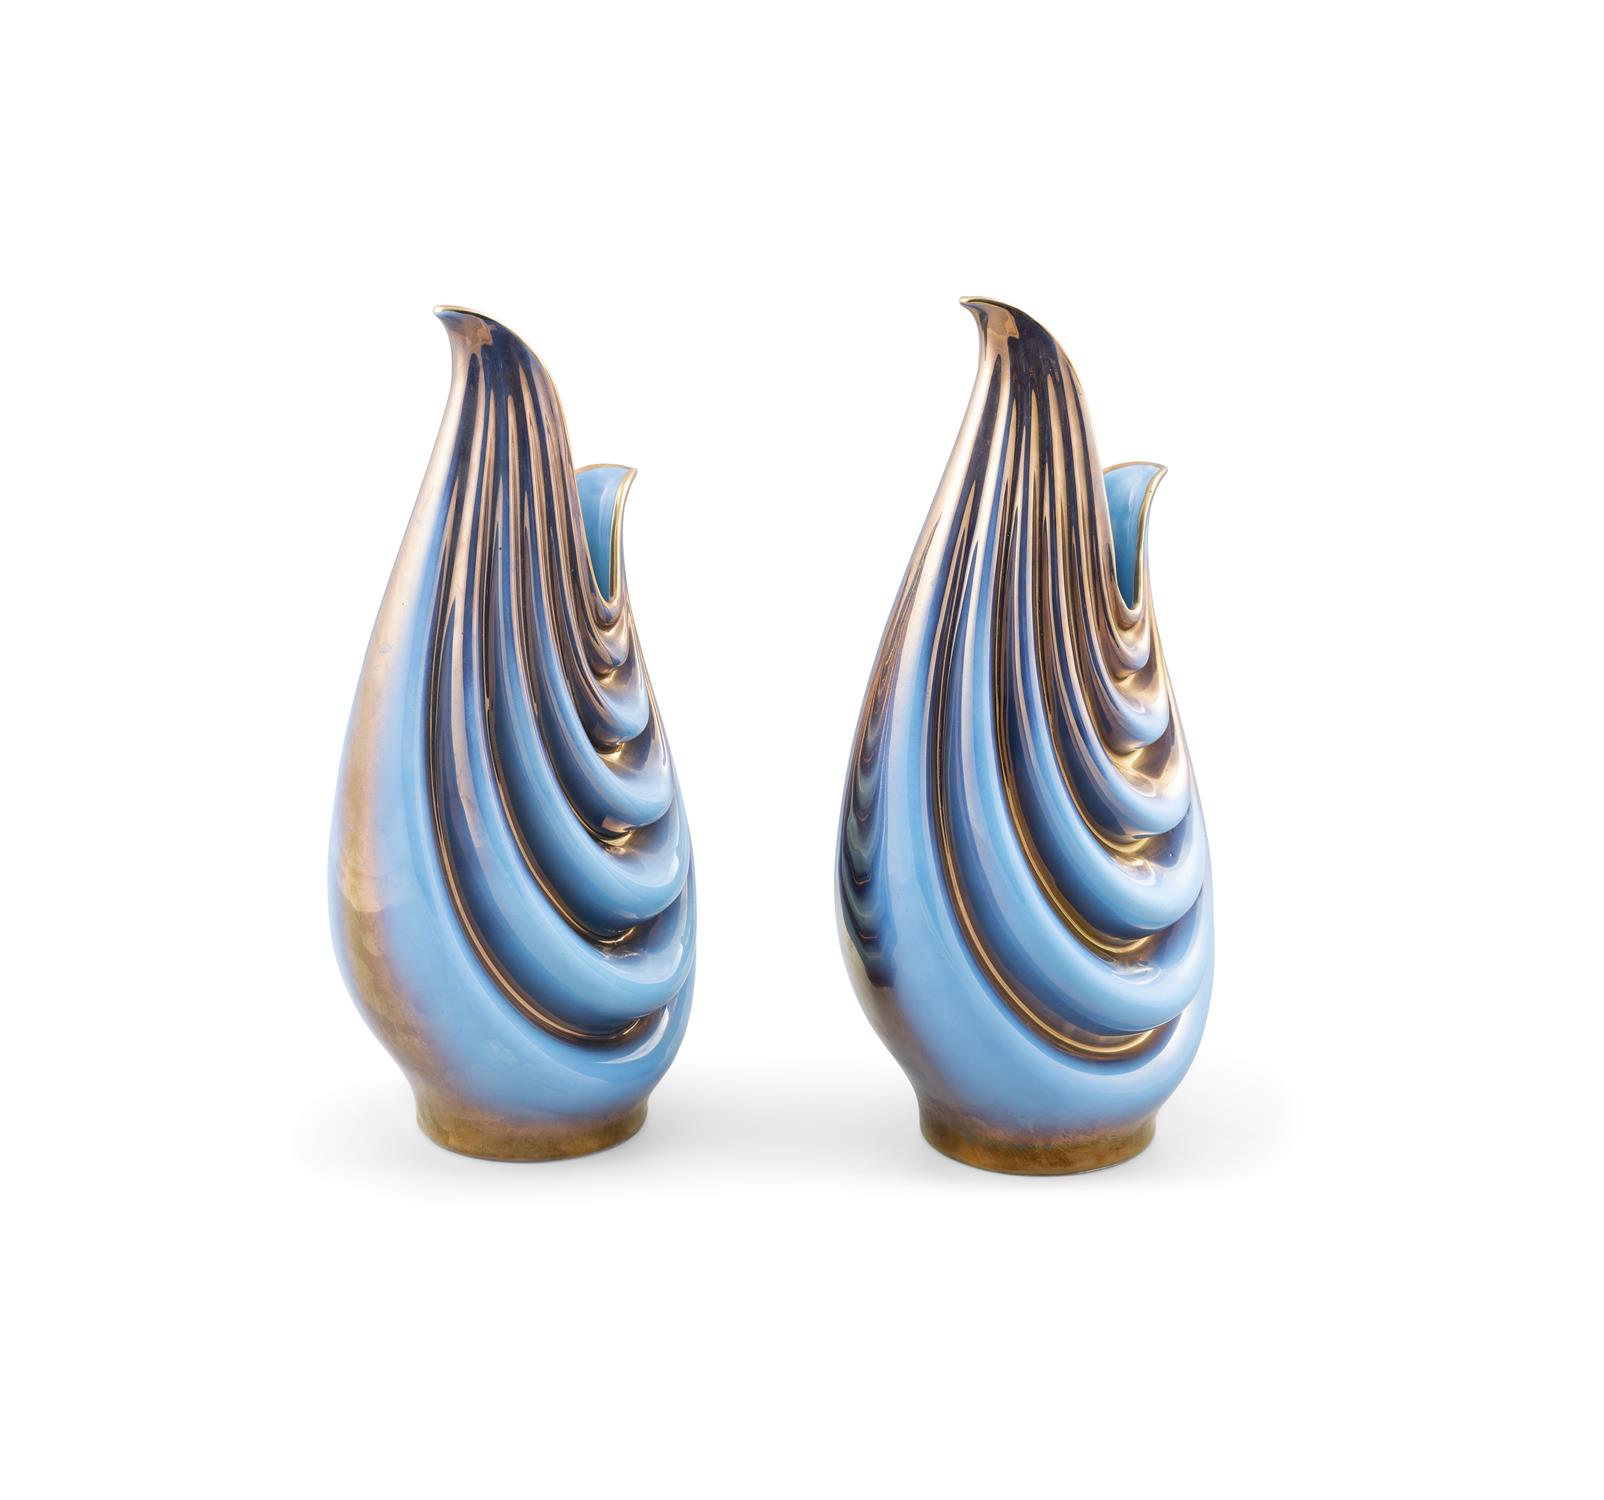 SICAS SESTO FIOR A pair of ceramic vases by Sicas Sesto Fior. Italy, c. 1970, with maker's mark. - Image 3 of 5